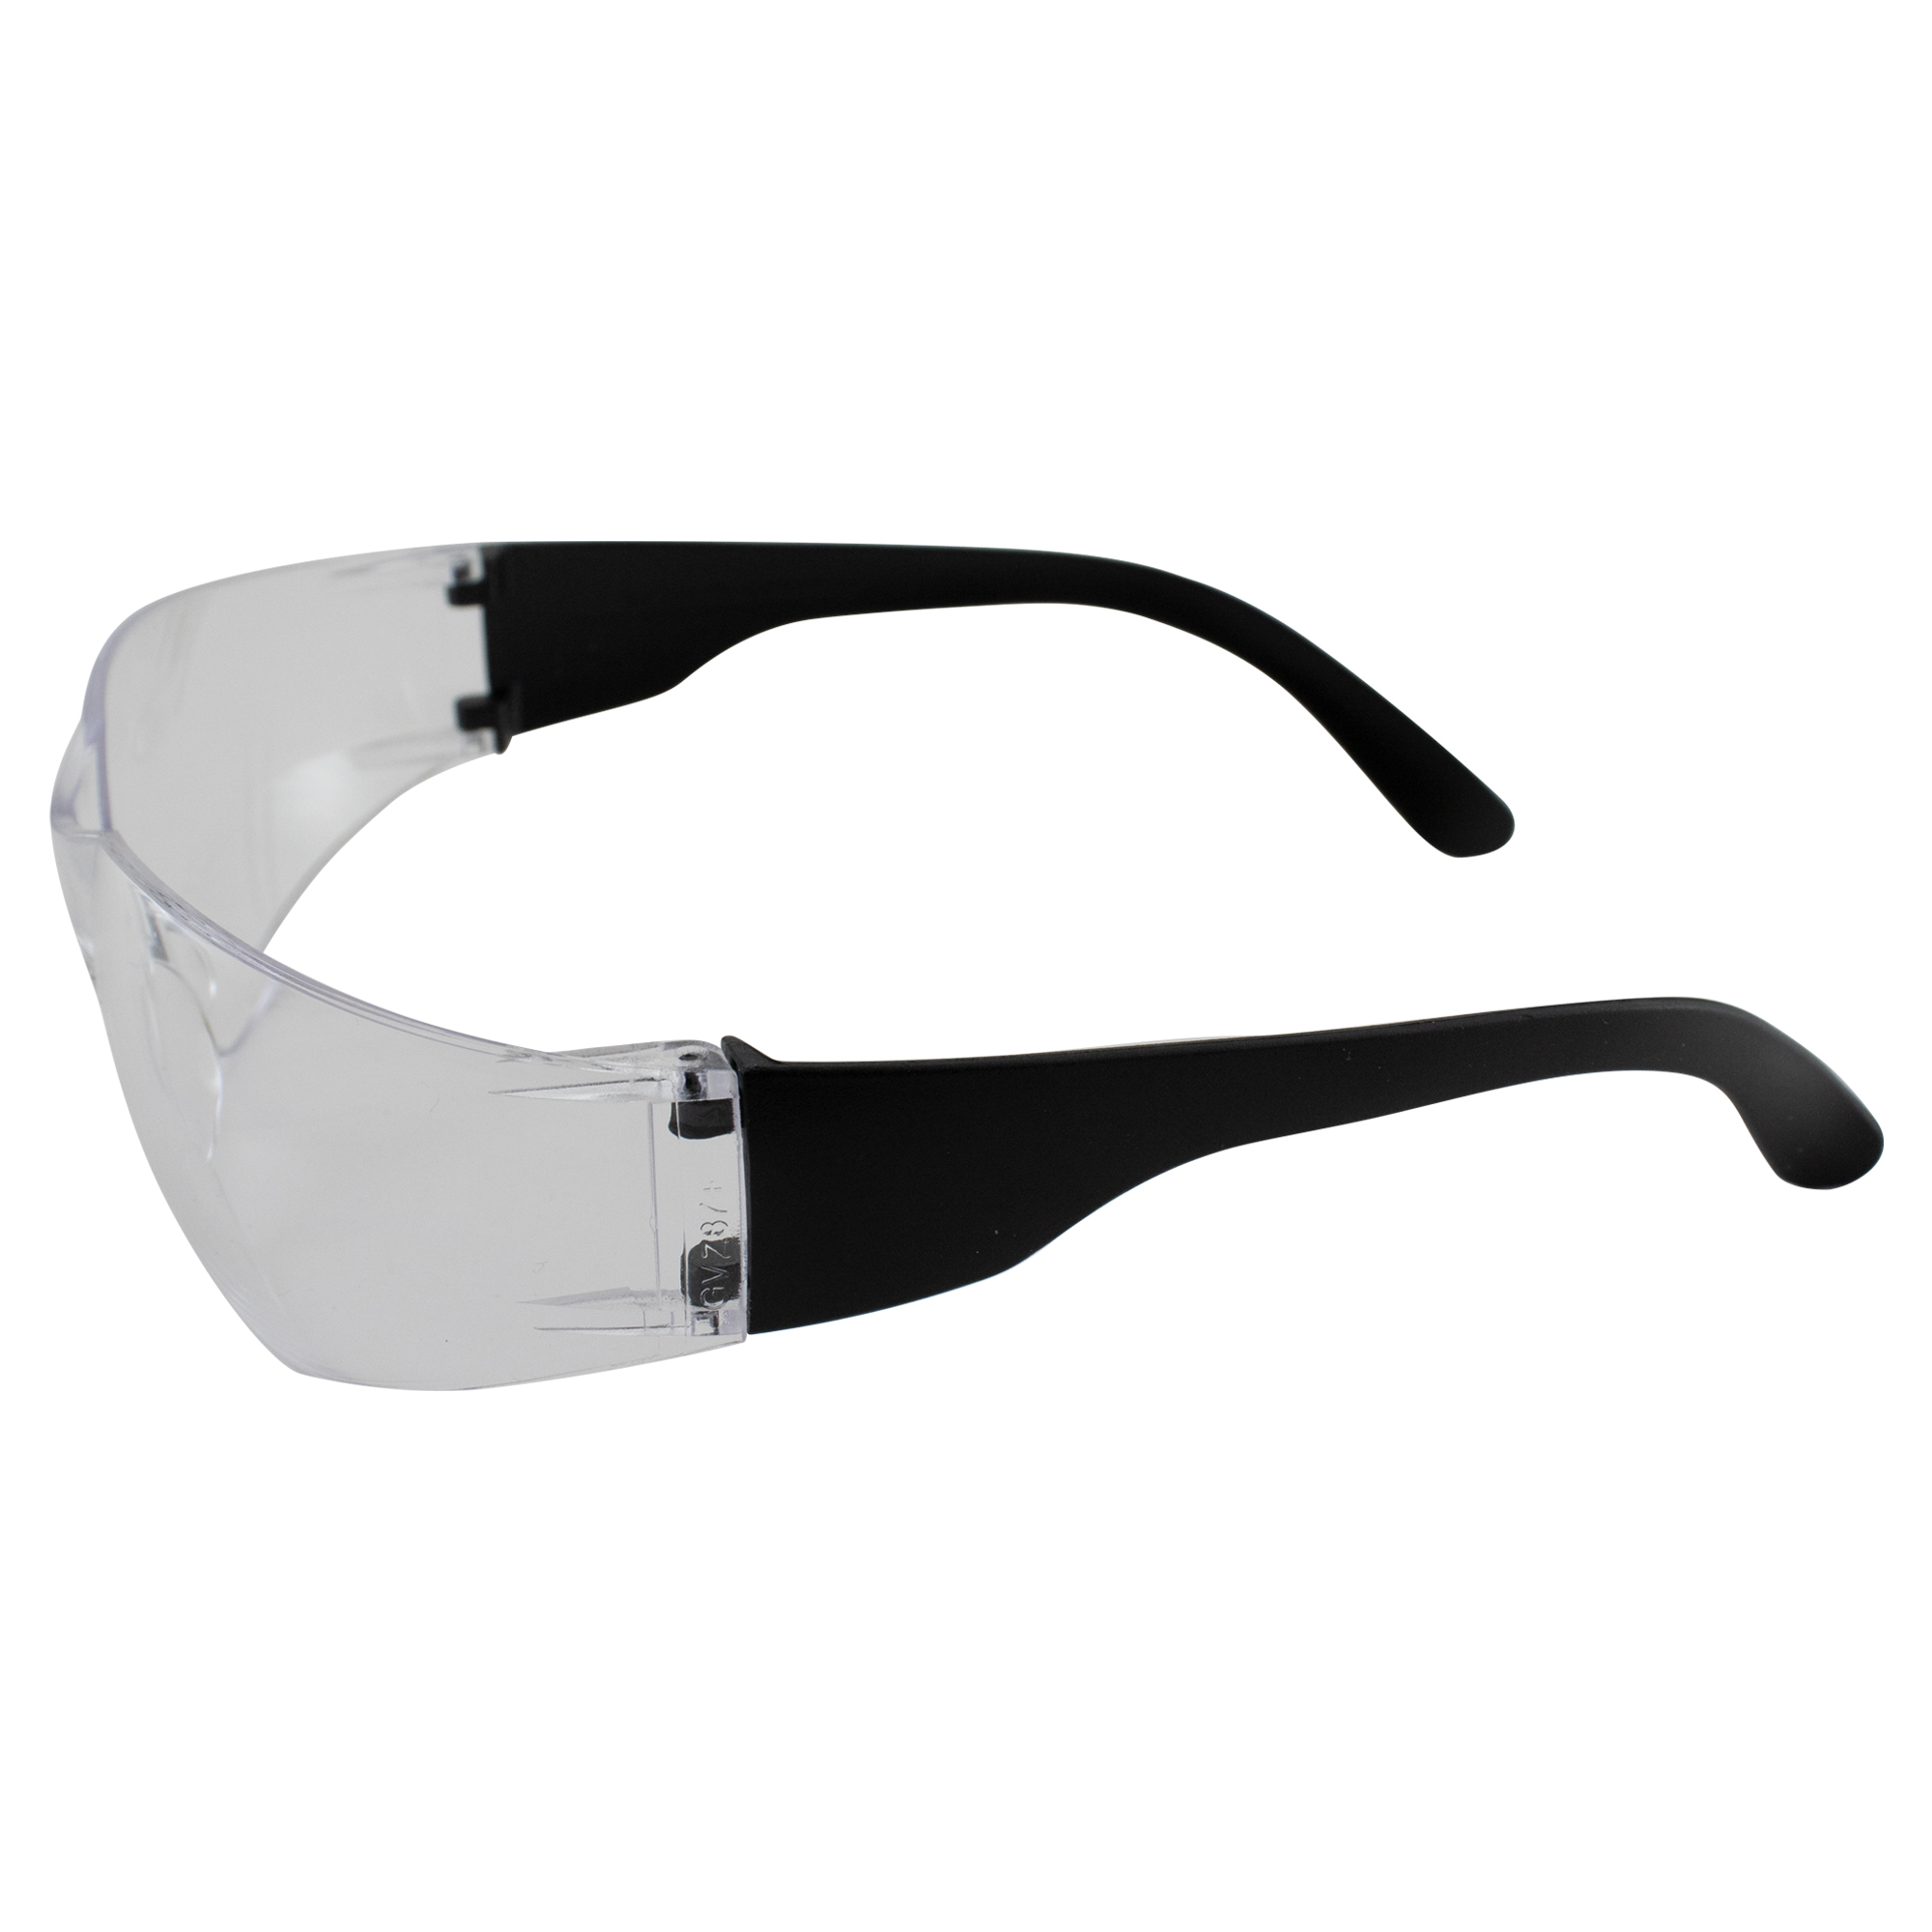 Two Pairs of Global Vision Rider Safety Motorcycle Riding Sunglasses Black Frames One Pair Clear Lens and One Pair Driving Mirror Lens with Microfiber Bags ANSI Z87.1 - image 3 of 9